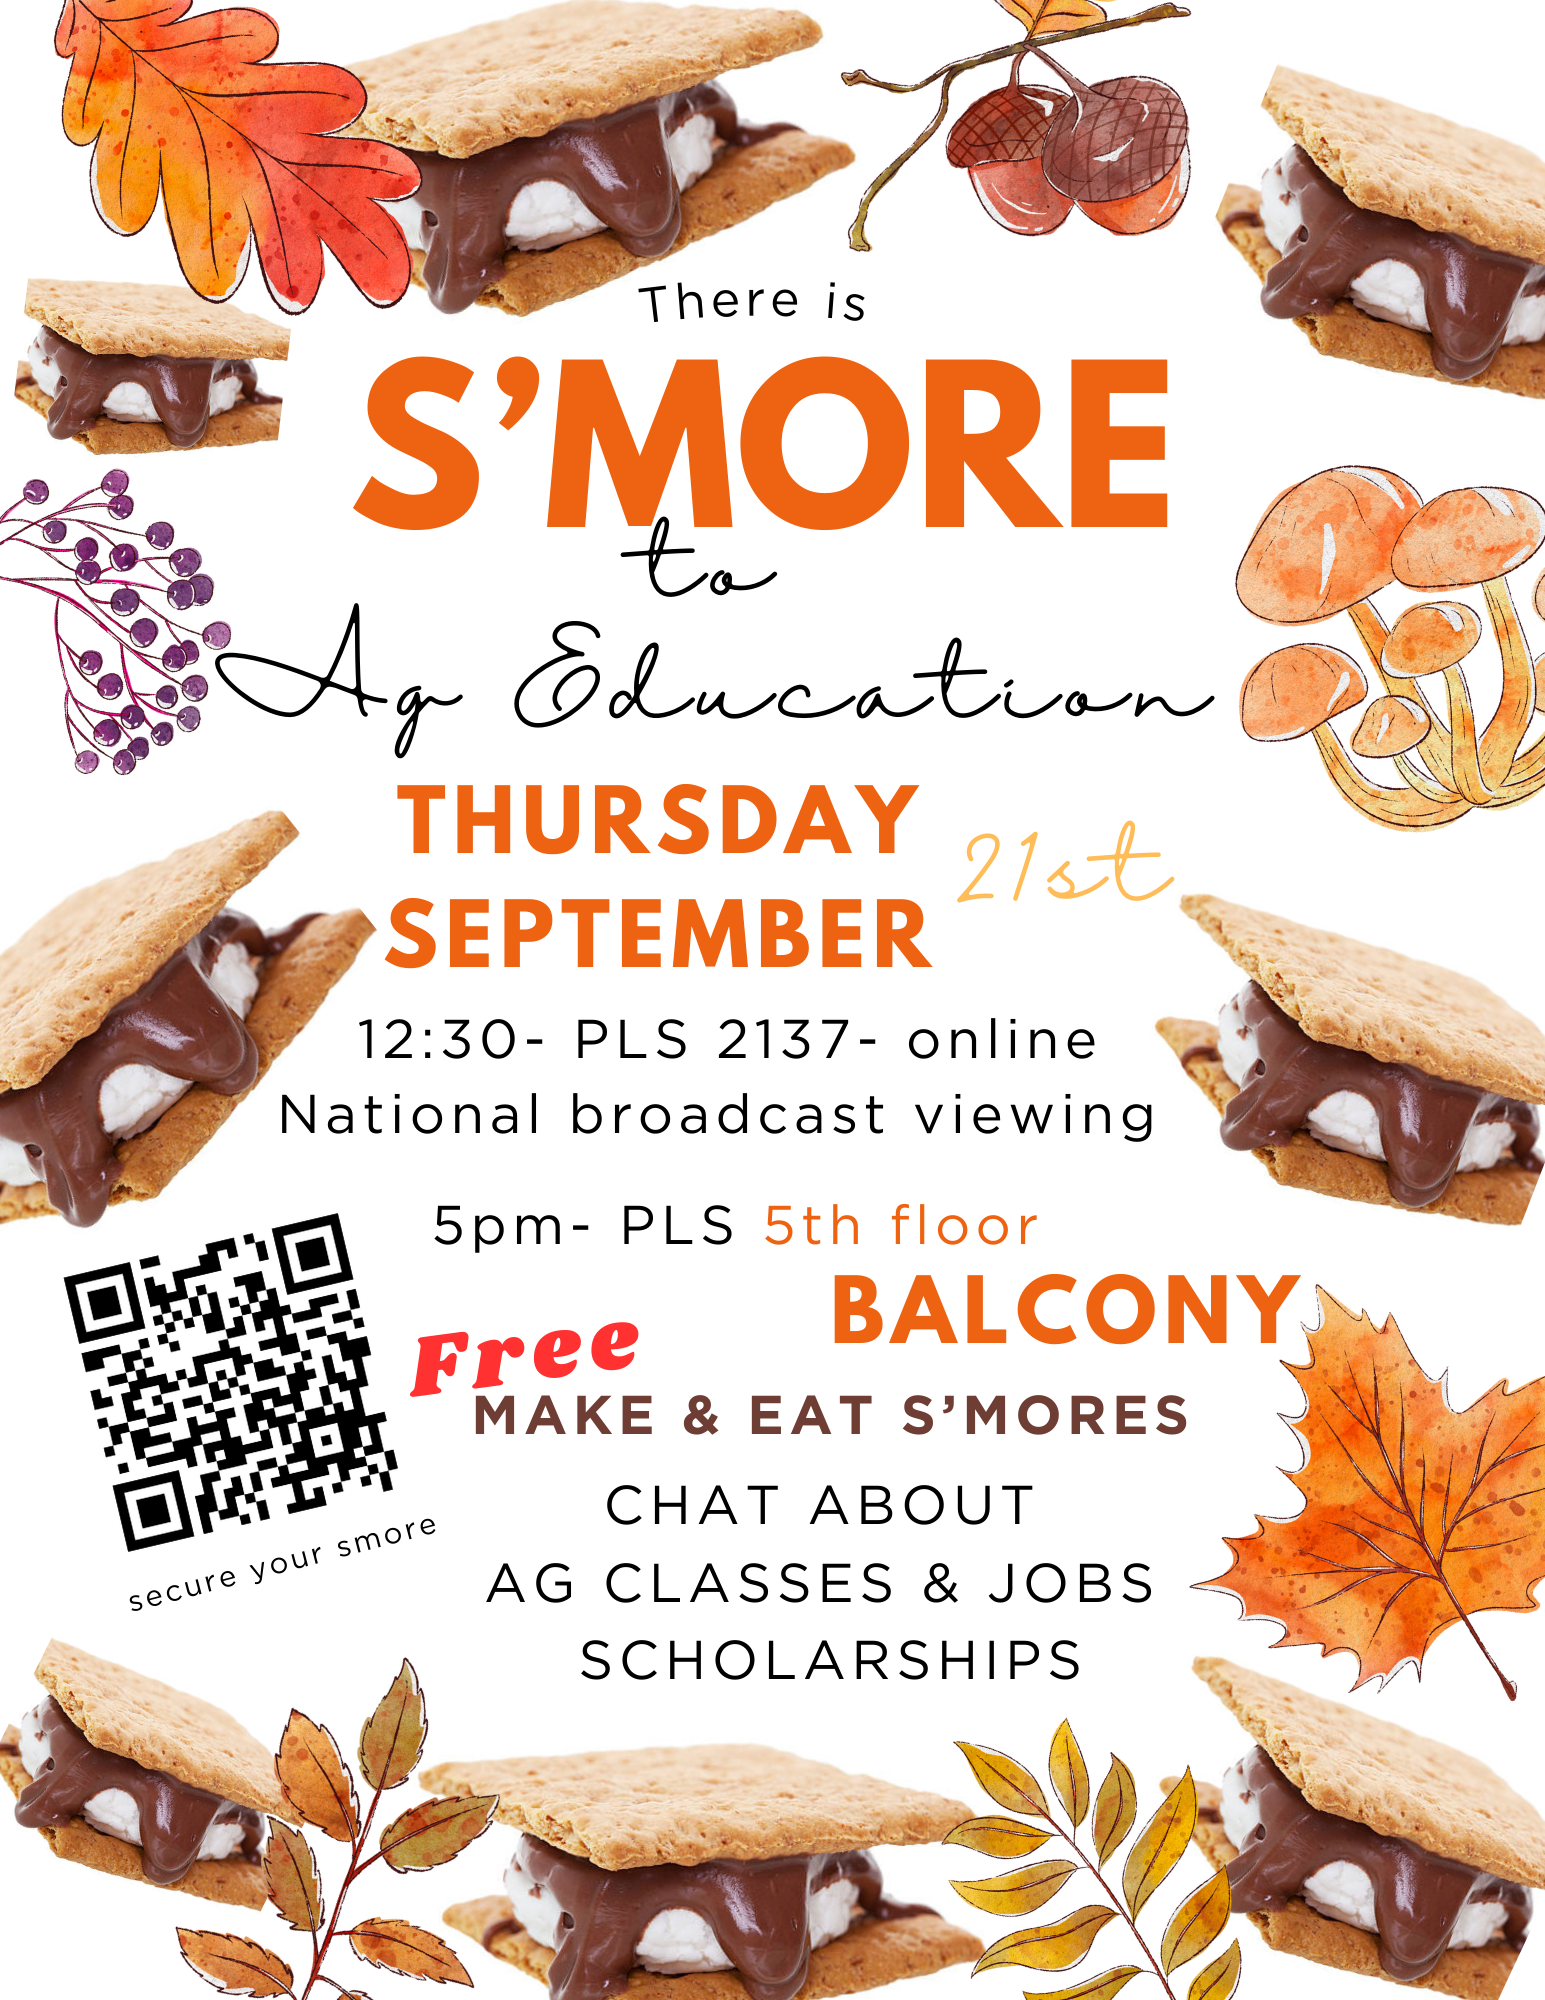 S'mores event